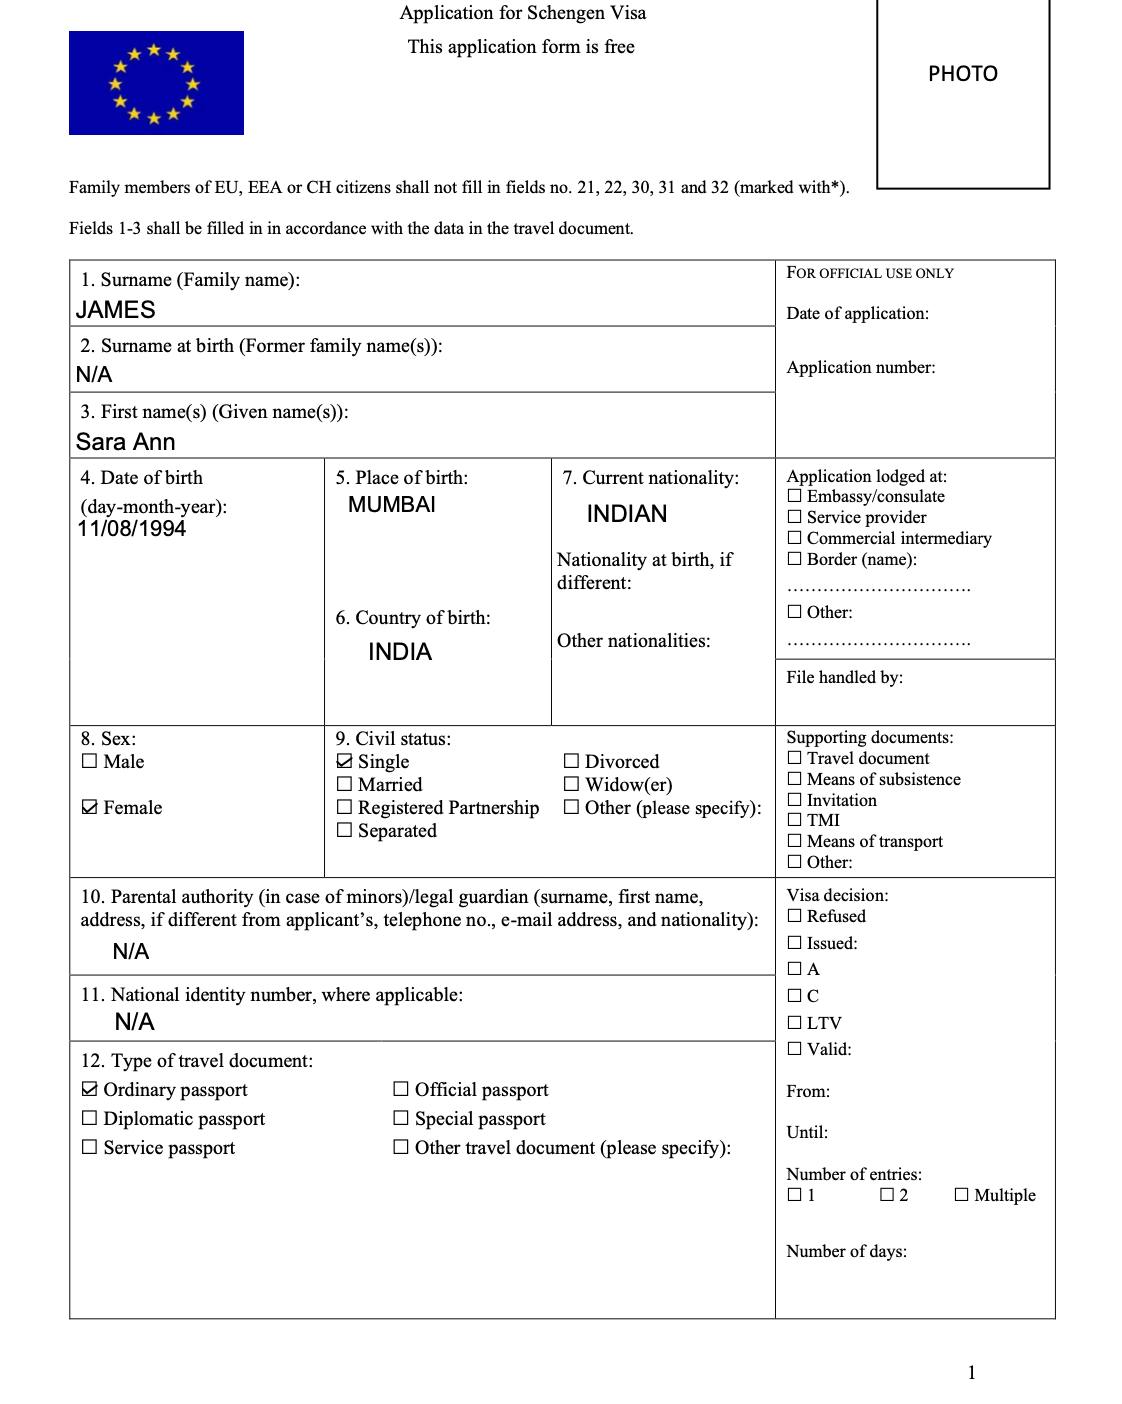 Page 1 of the Schengen visa application form